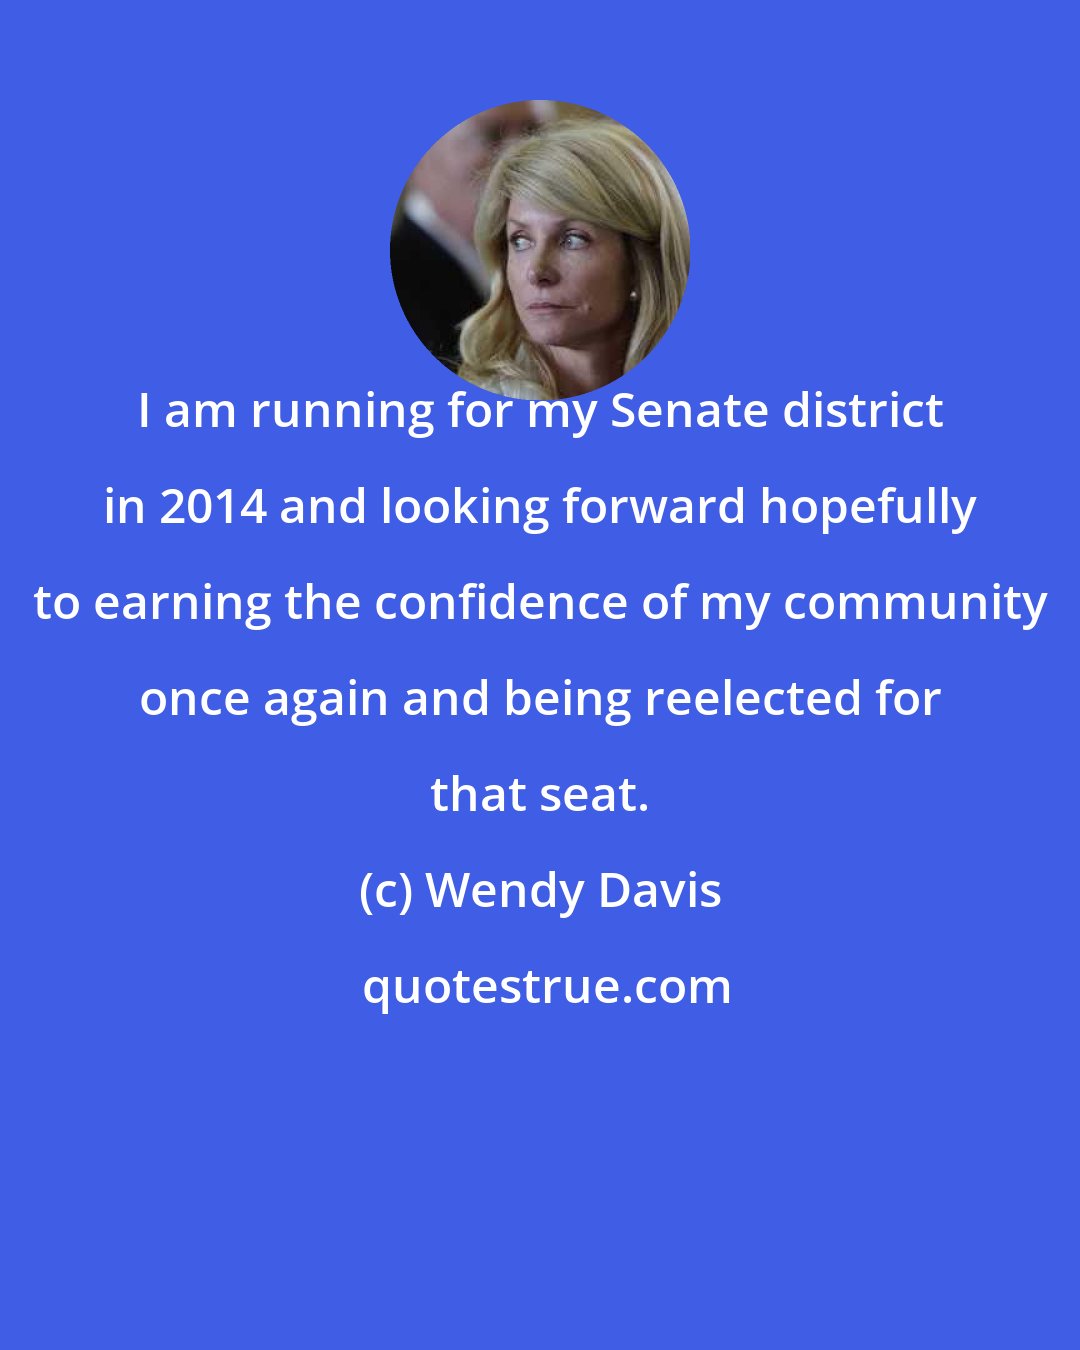 Wendy Davis: I am running for my Senate district in 2014 and looking forward hopefully to earning the confidence of my community once again and being reelected for that seat.